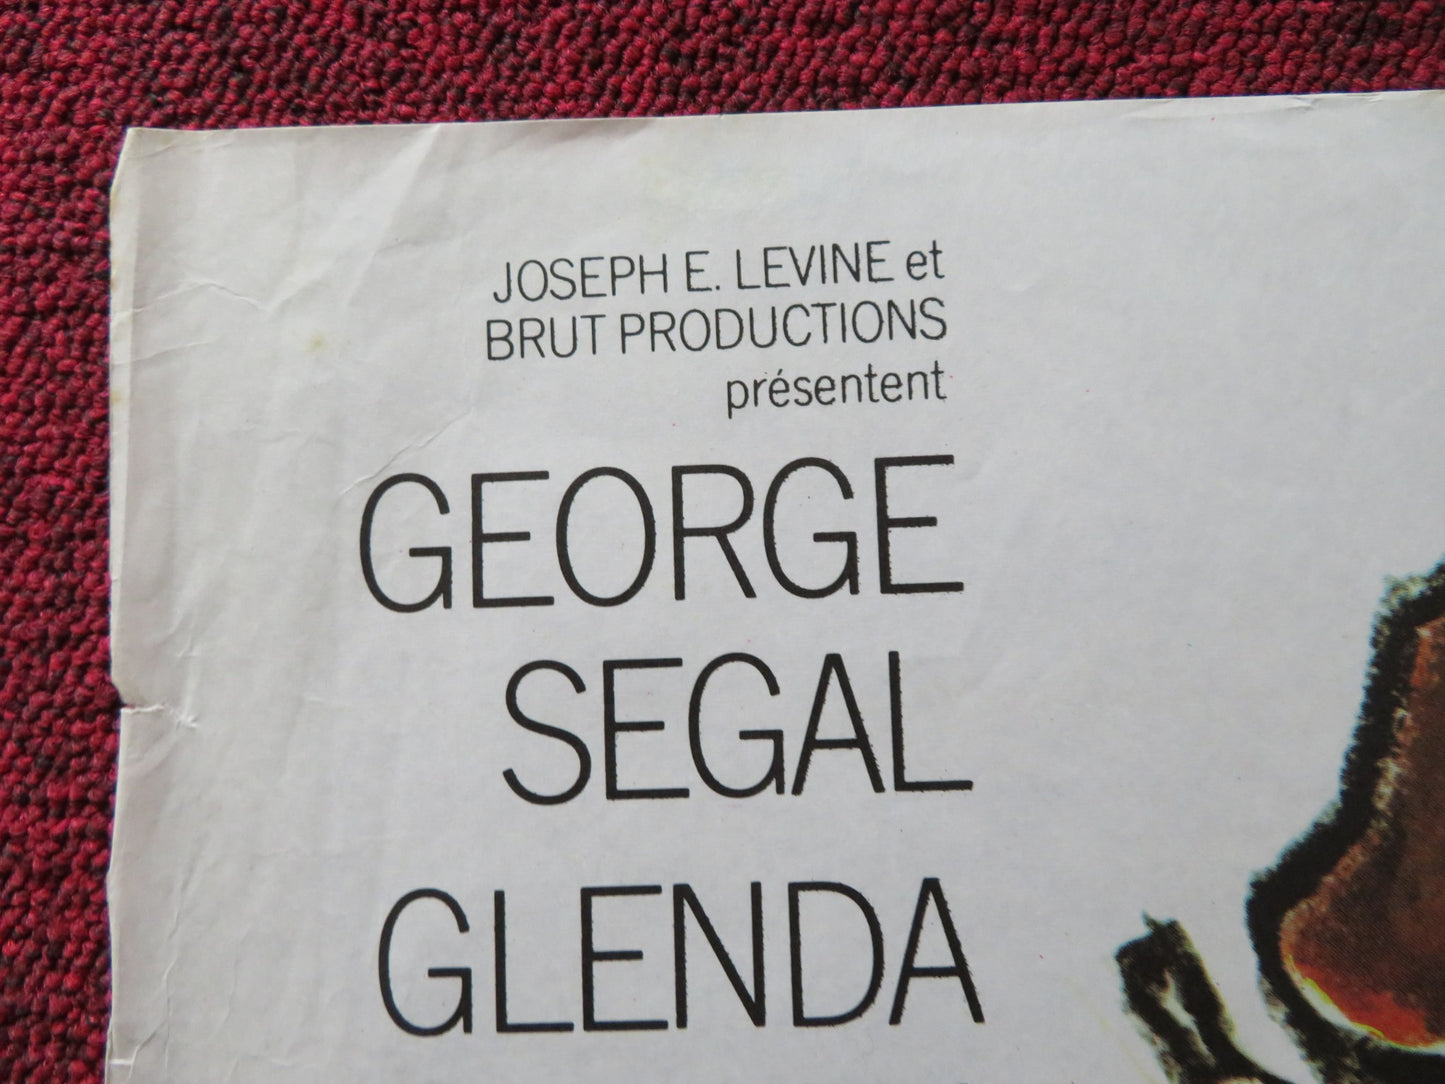 A TOUCH OF CLASS FRENCH POSTER GEORGE SEGAL GLENDA JACKSON 1973